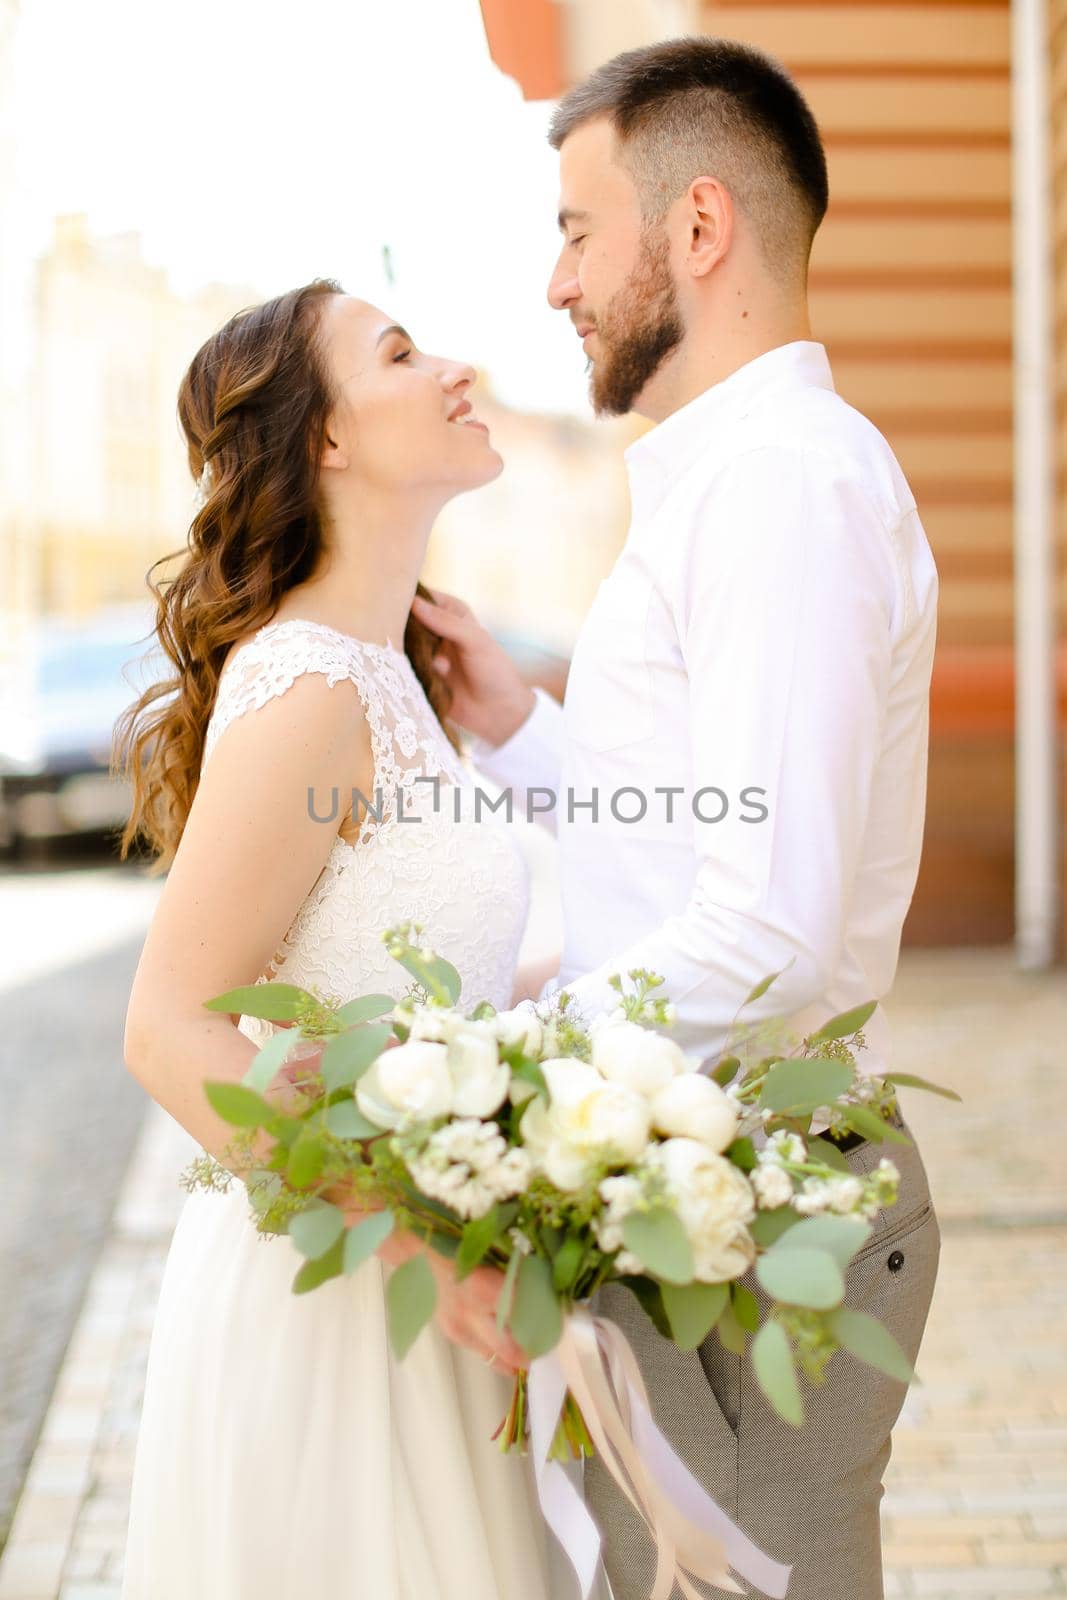 Happy handsome groom hugging bride keeping flowers and wearing white dress. Concept of married couple and love, wedding photo session.